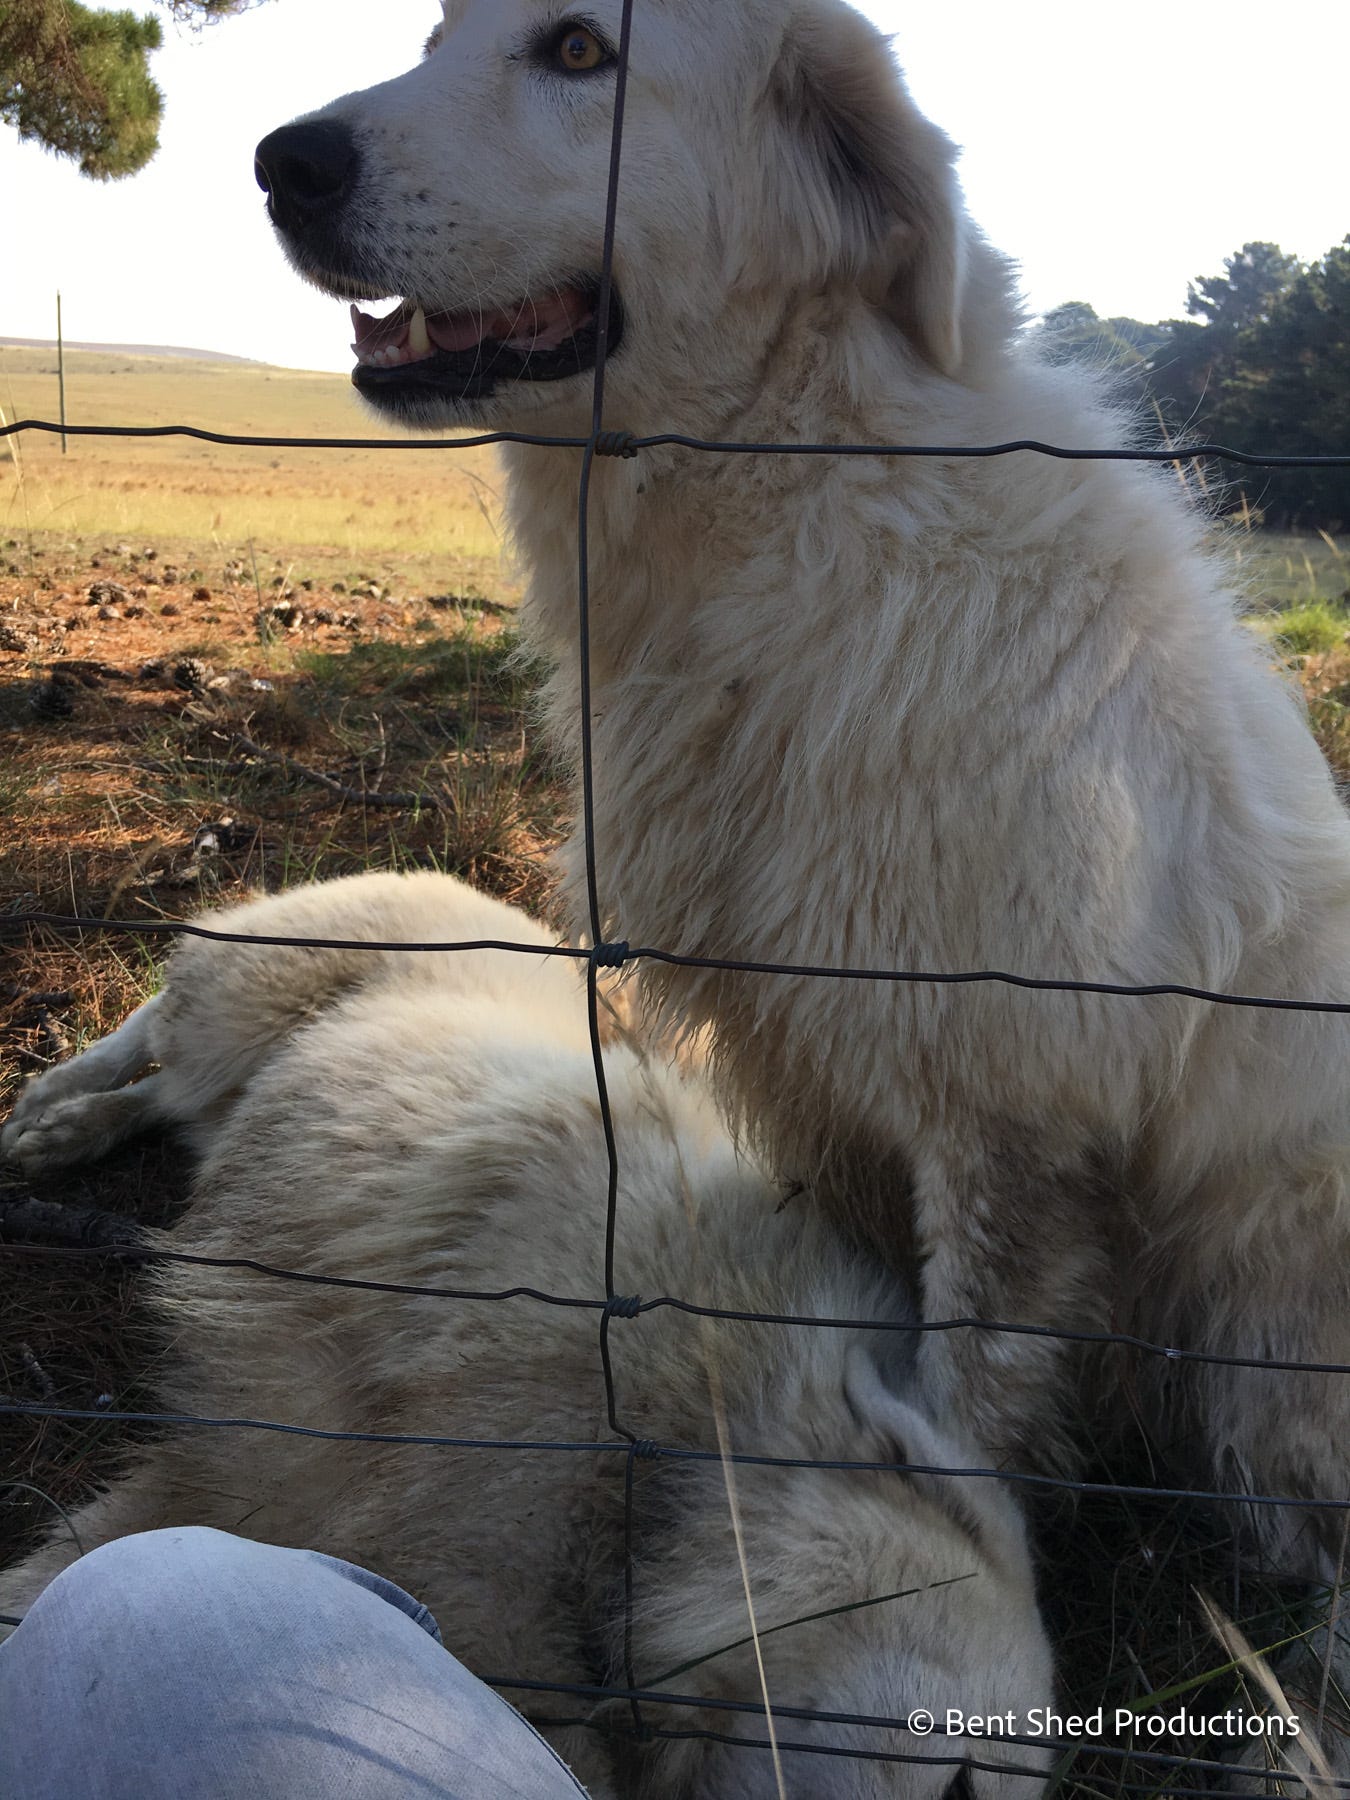 A close-up of two large white Maremma dogs. One is sitting upright, with its head at the top of the photo. The other is lying sideways. They are behind a wire fence.